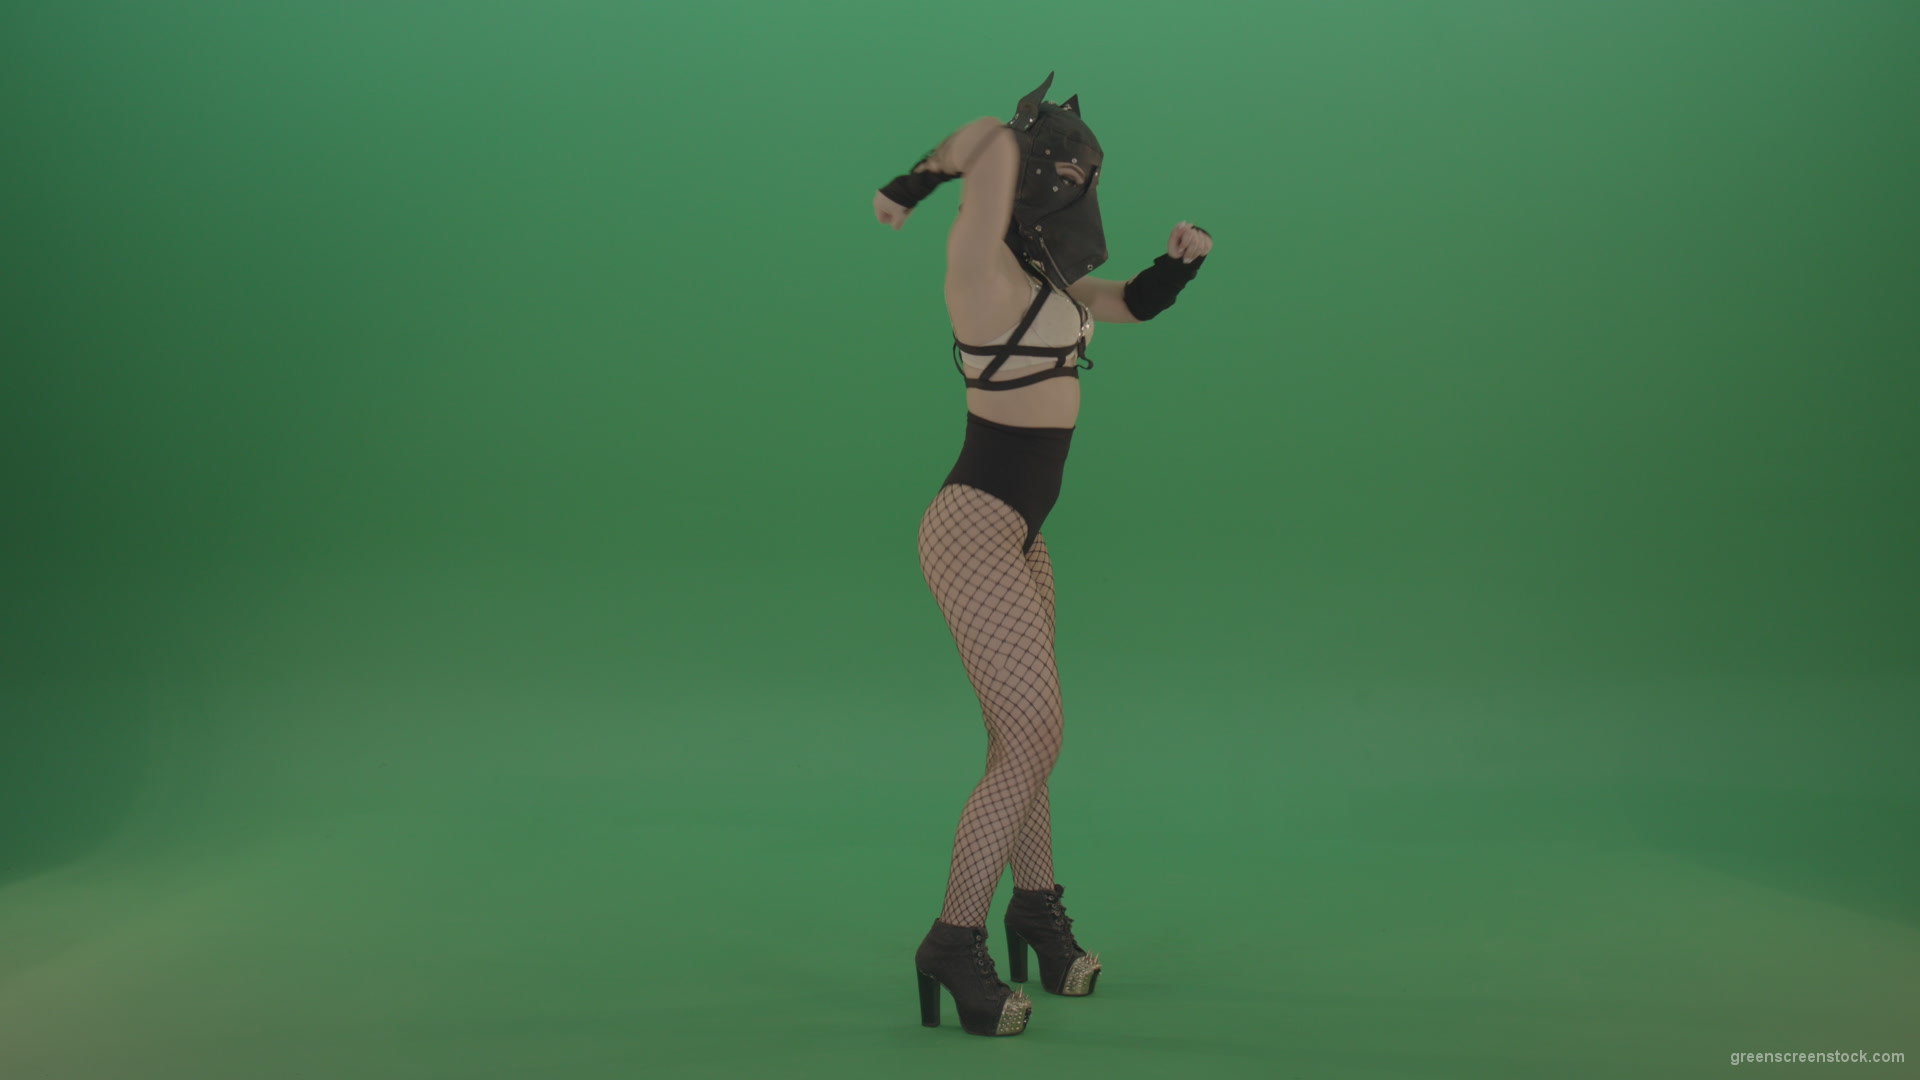 EDM-Girl-in-Wolf-Mask-making-fight-beats-on-green-screen_002 Green Screen Stock